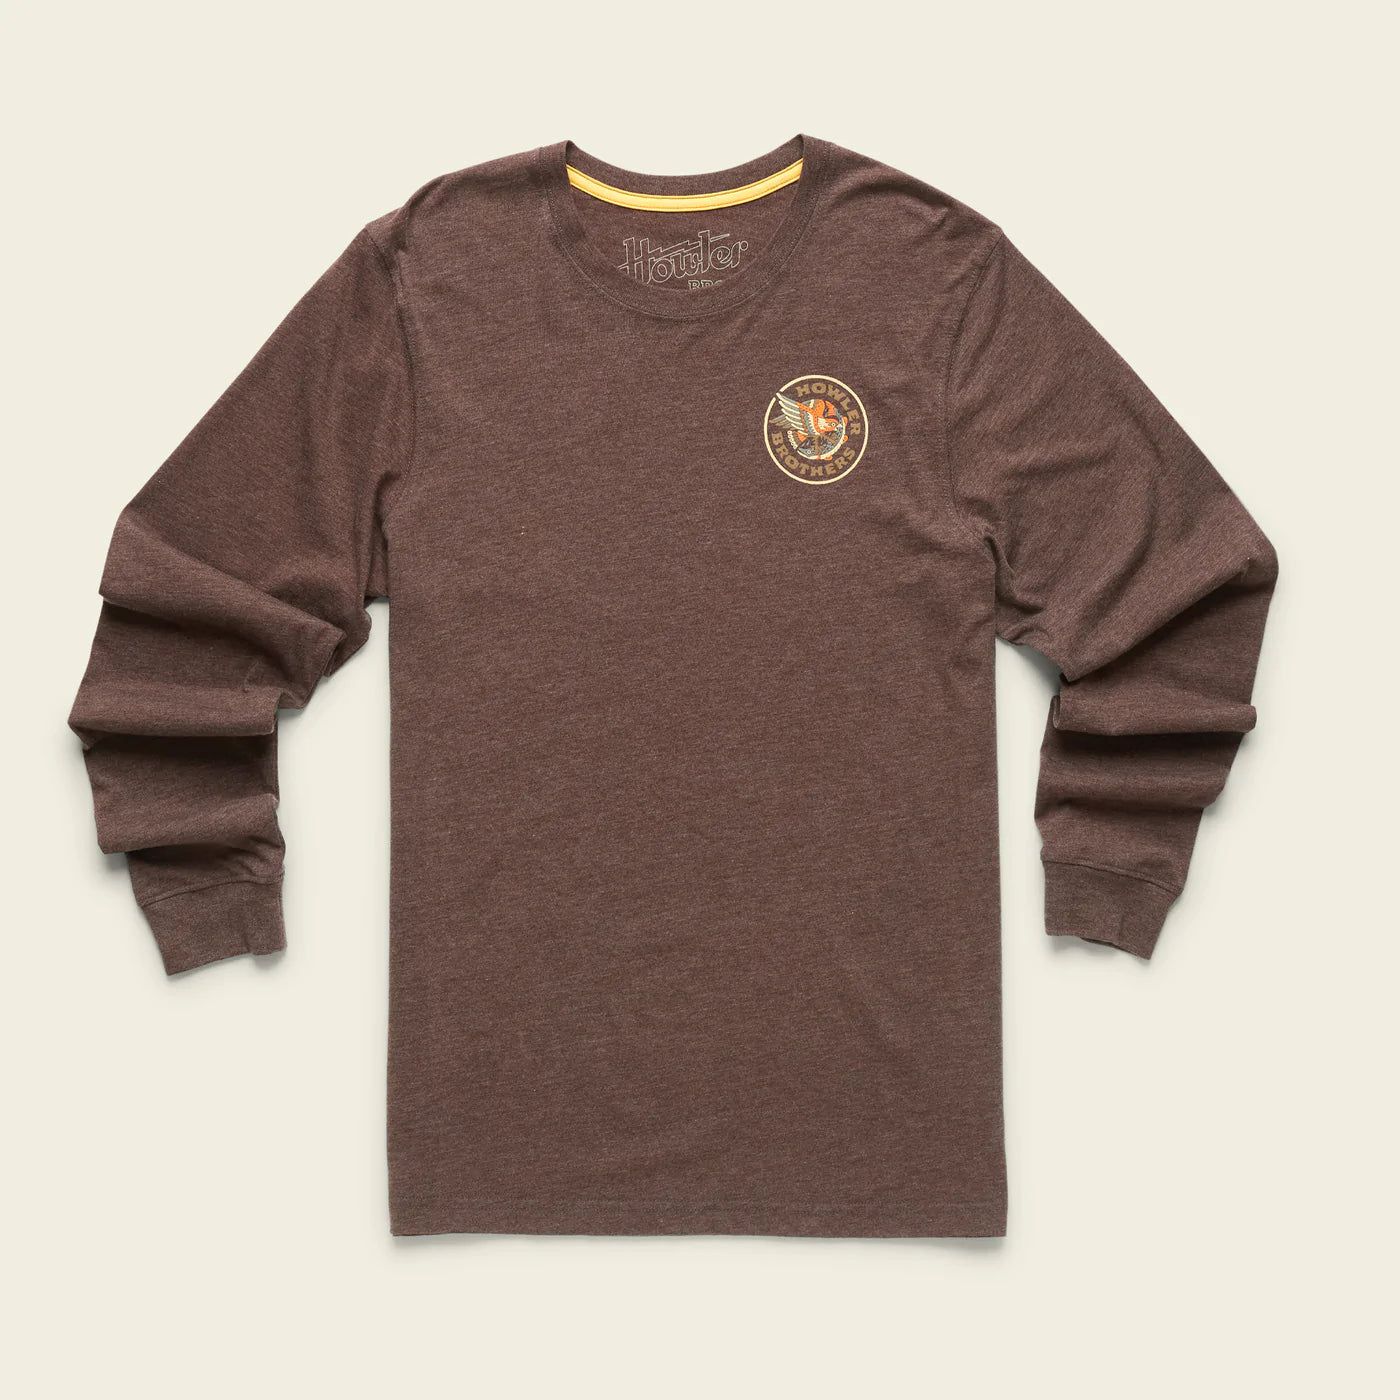 Howler Bros Osprey and Pike Select Longsleeve T-Shirt